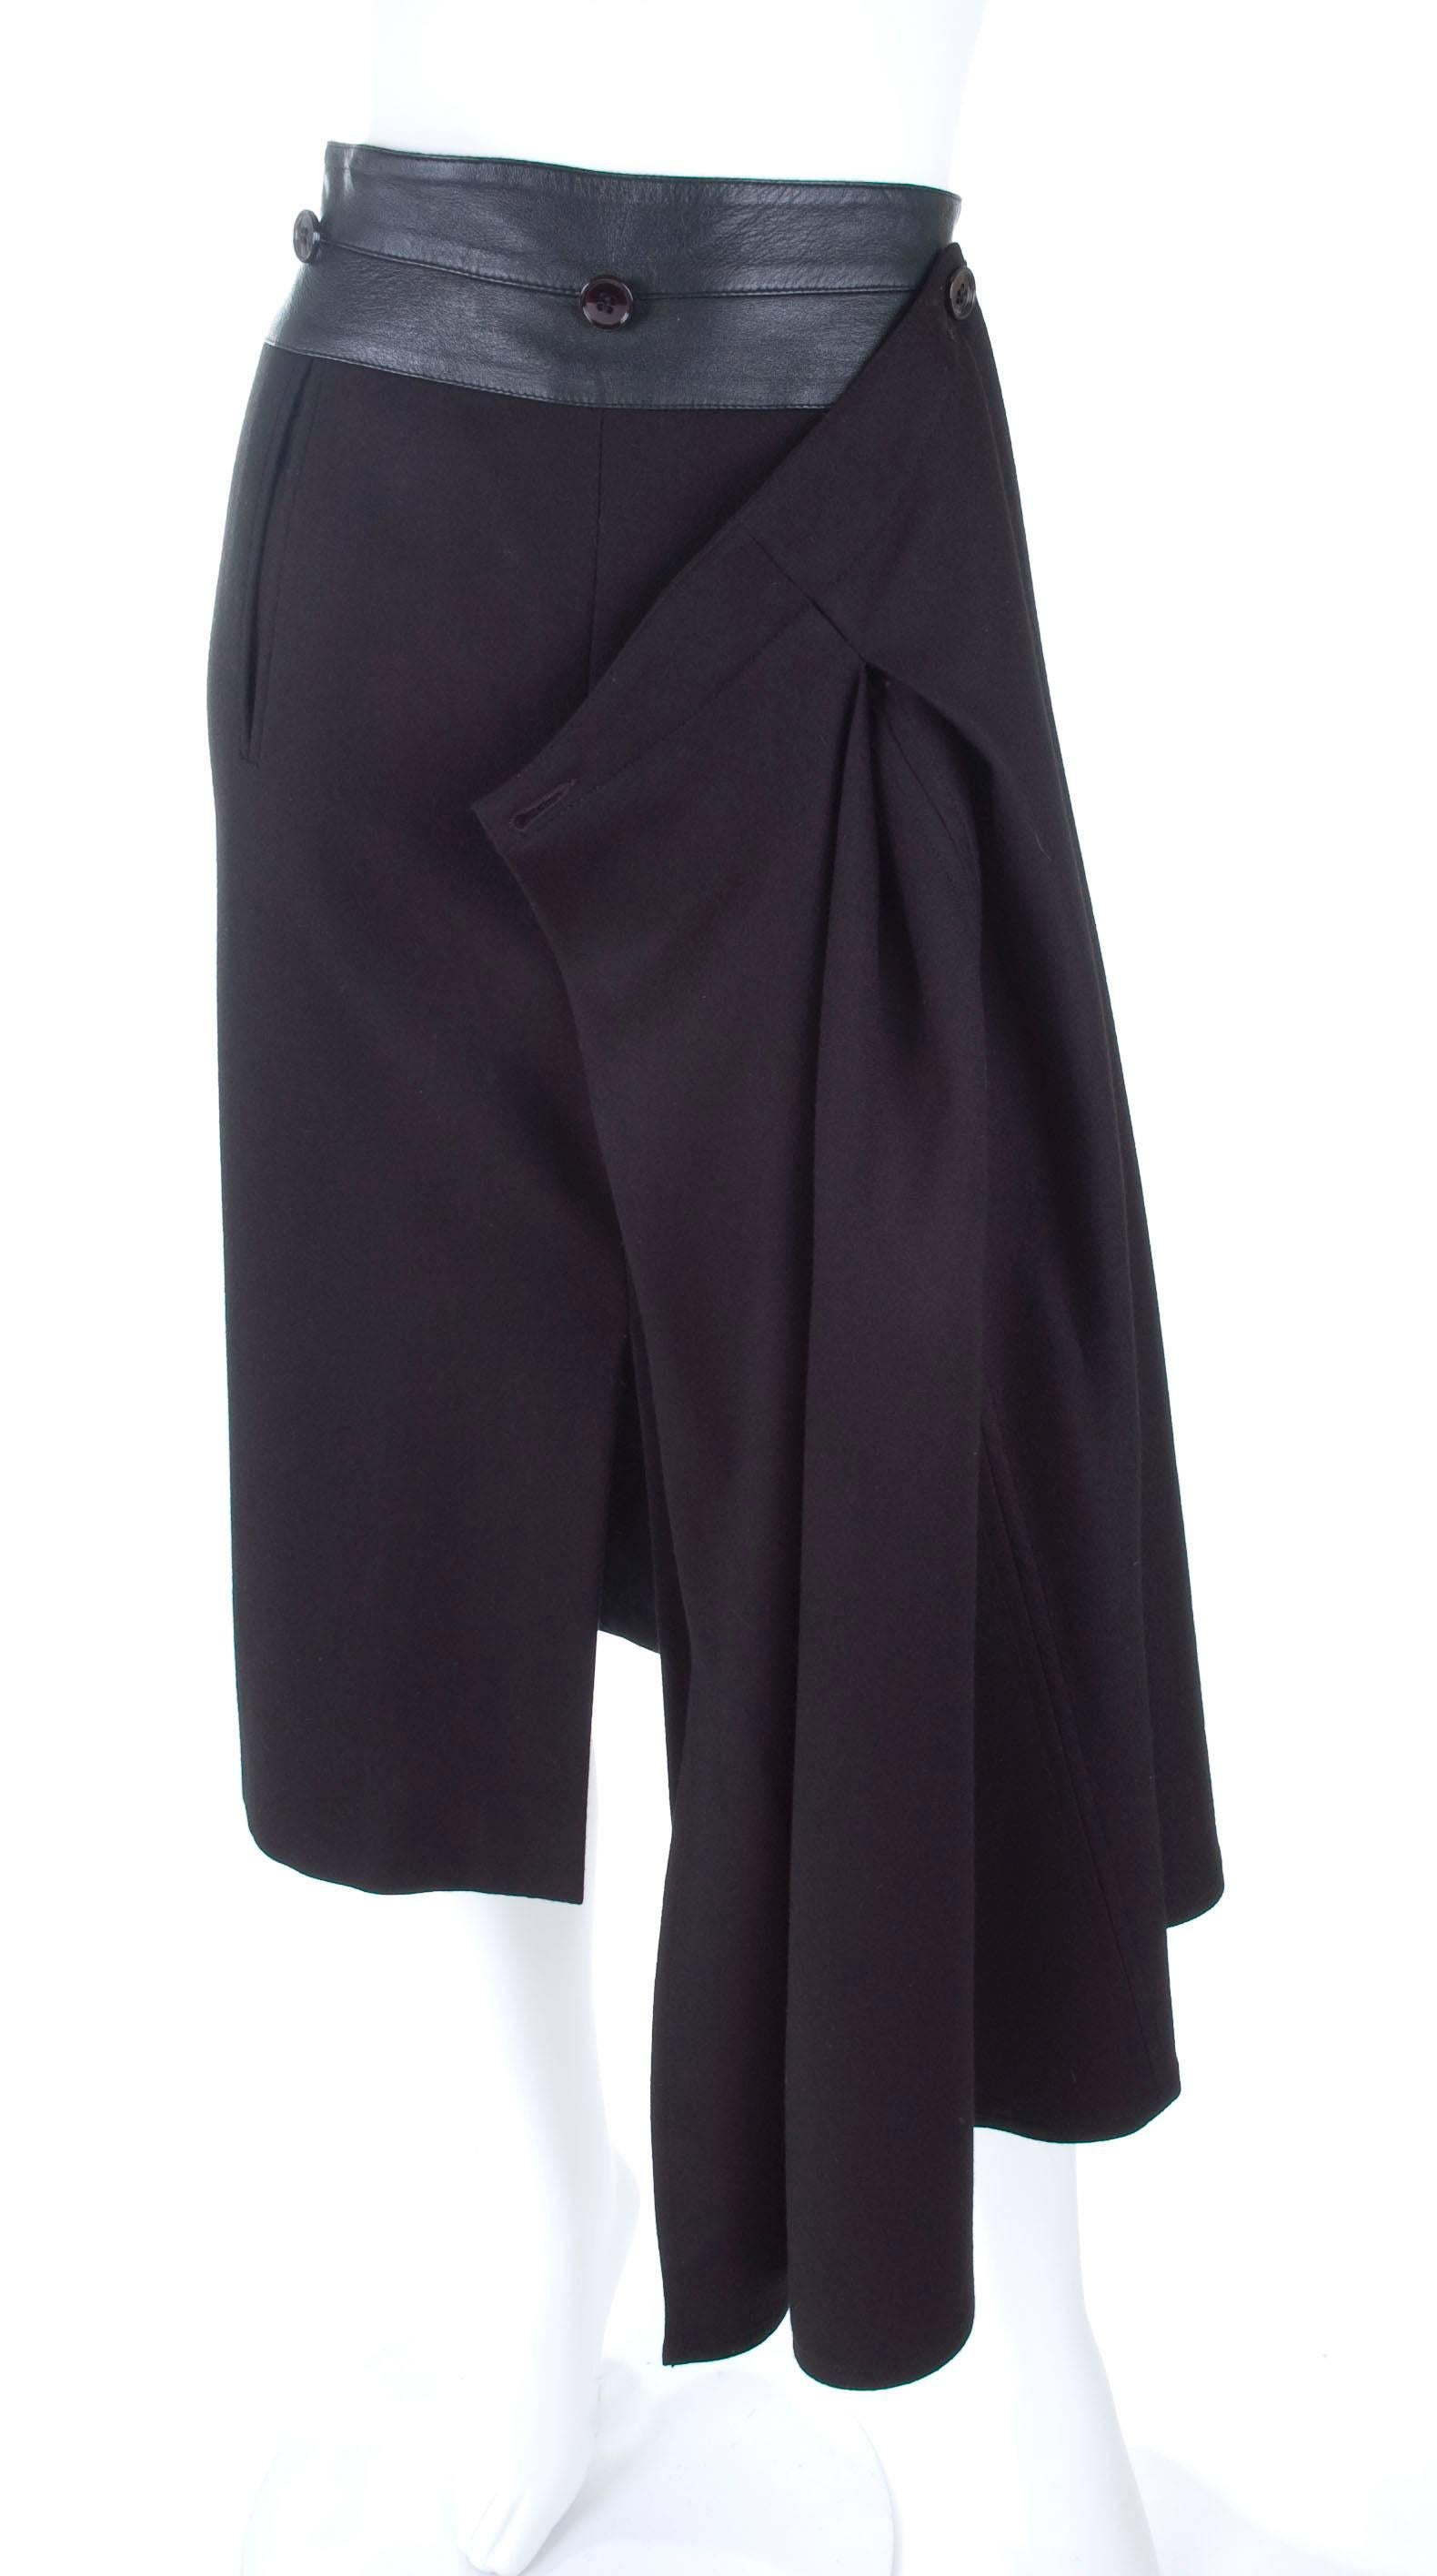 Vintage 1980's Gianfranco Ferre Black Skirt made from wool and leather. 
Pencil skirt with front slit to wear by it's self or with the removable front panel. Excellent condition - no flaws to mention.
Size It 42 - US 6  
Measurements: Length